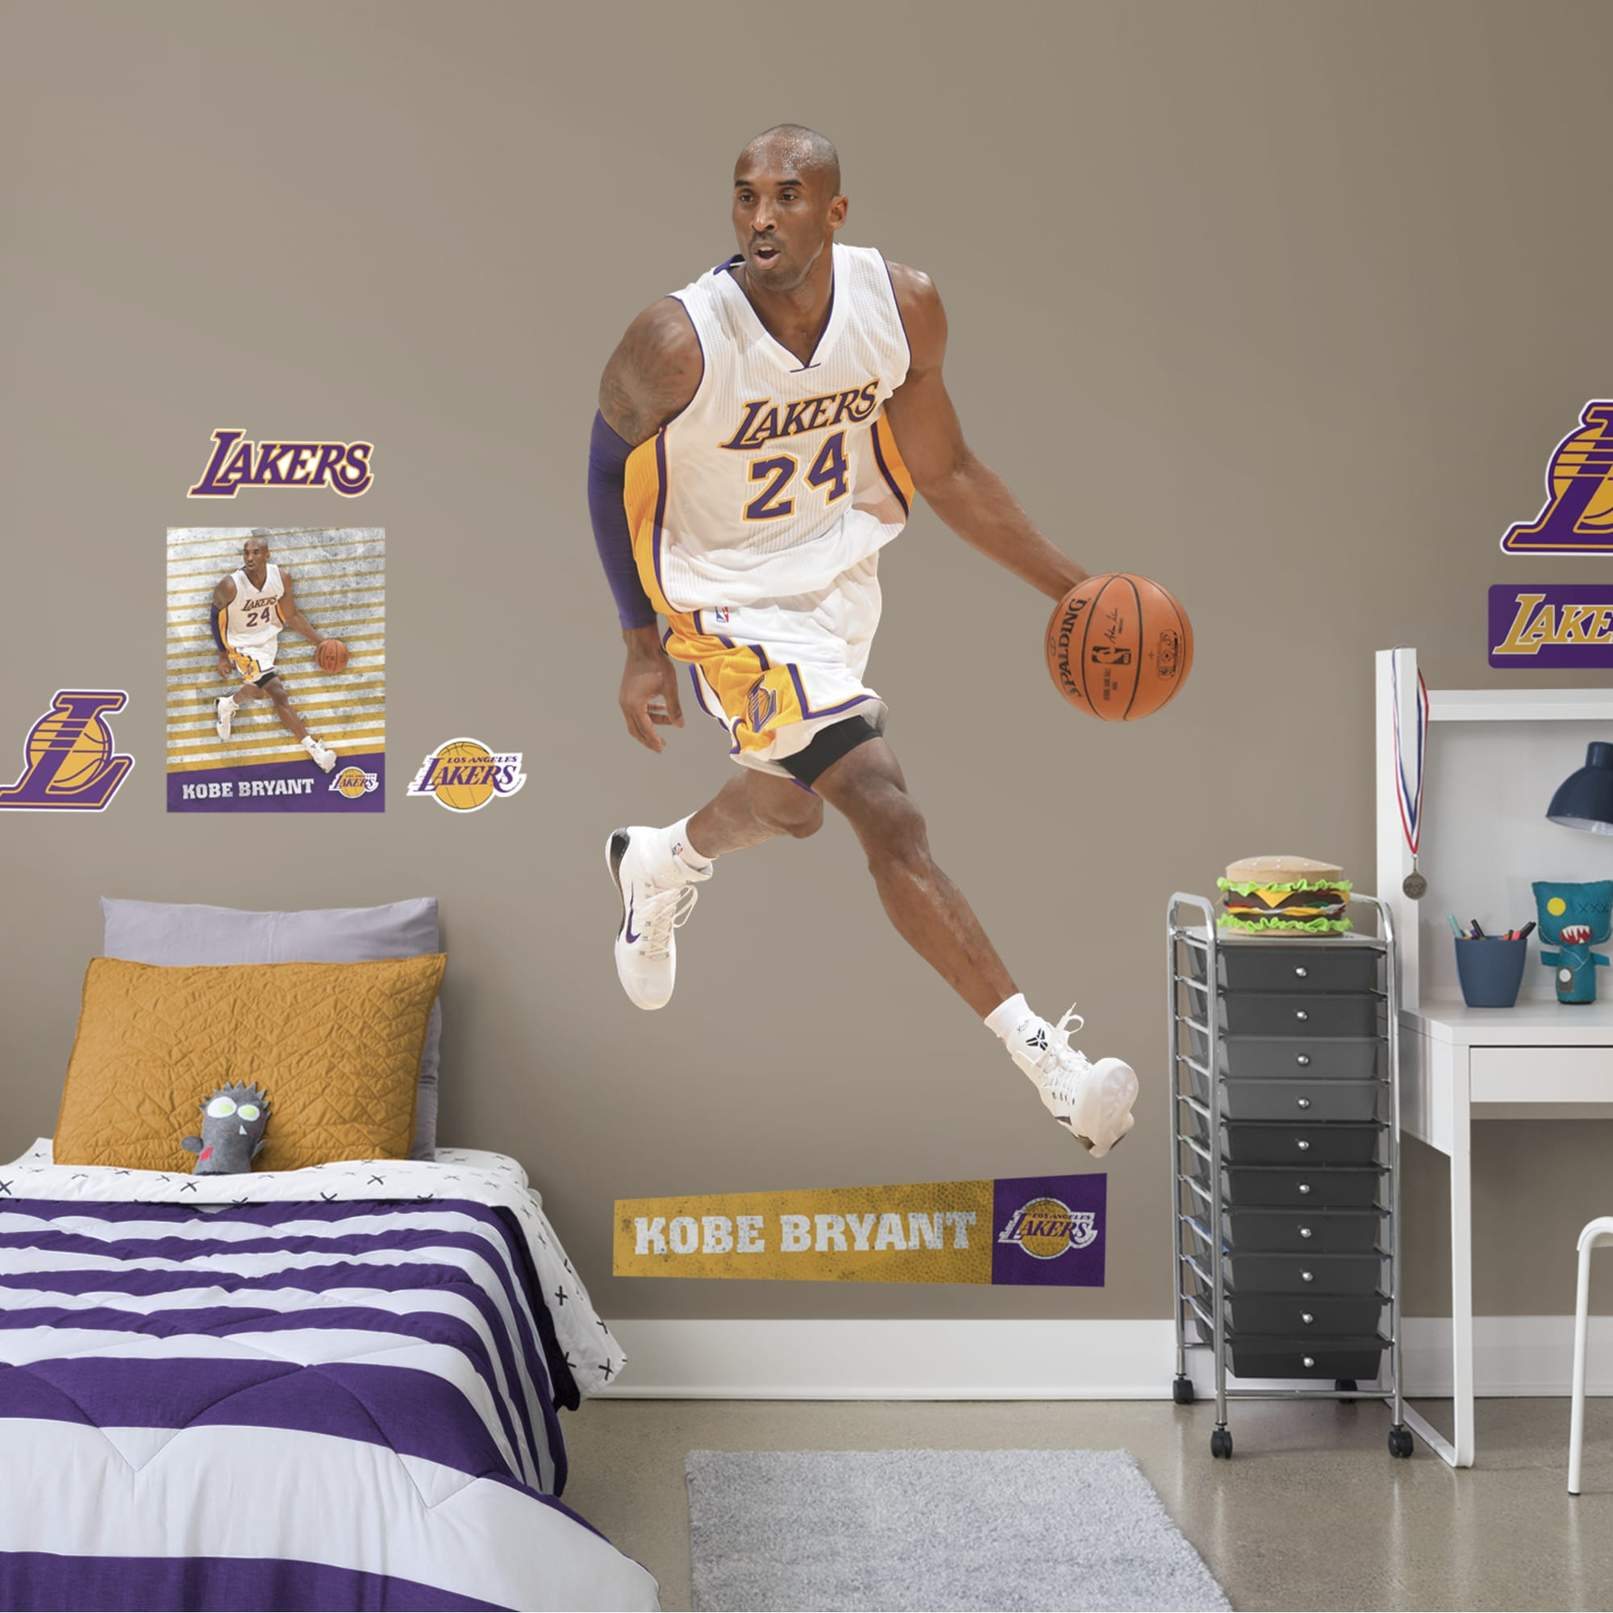 https://fathead.com/products/m22-20554?variant=33002106388568